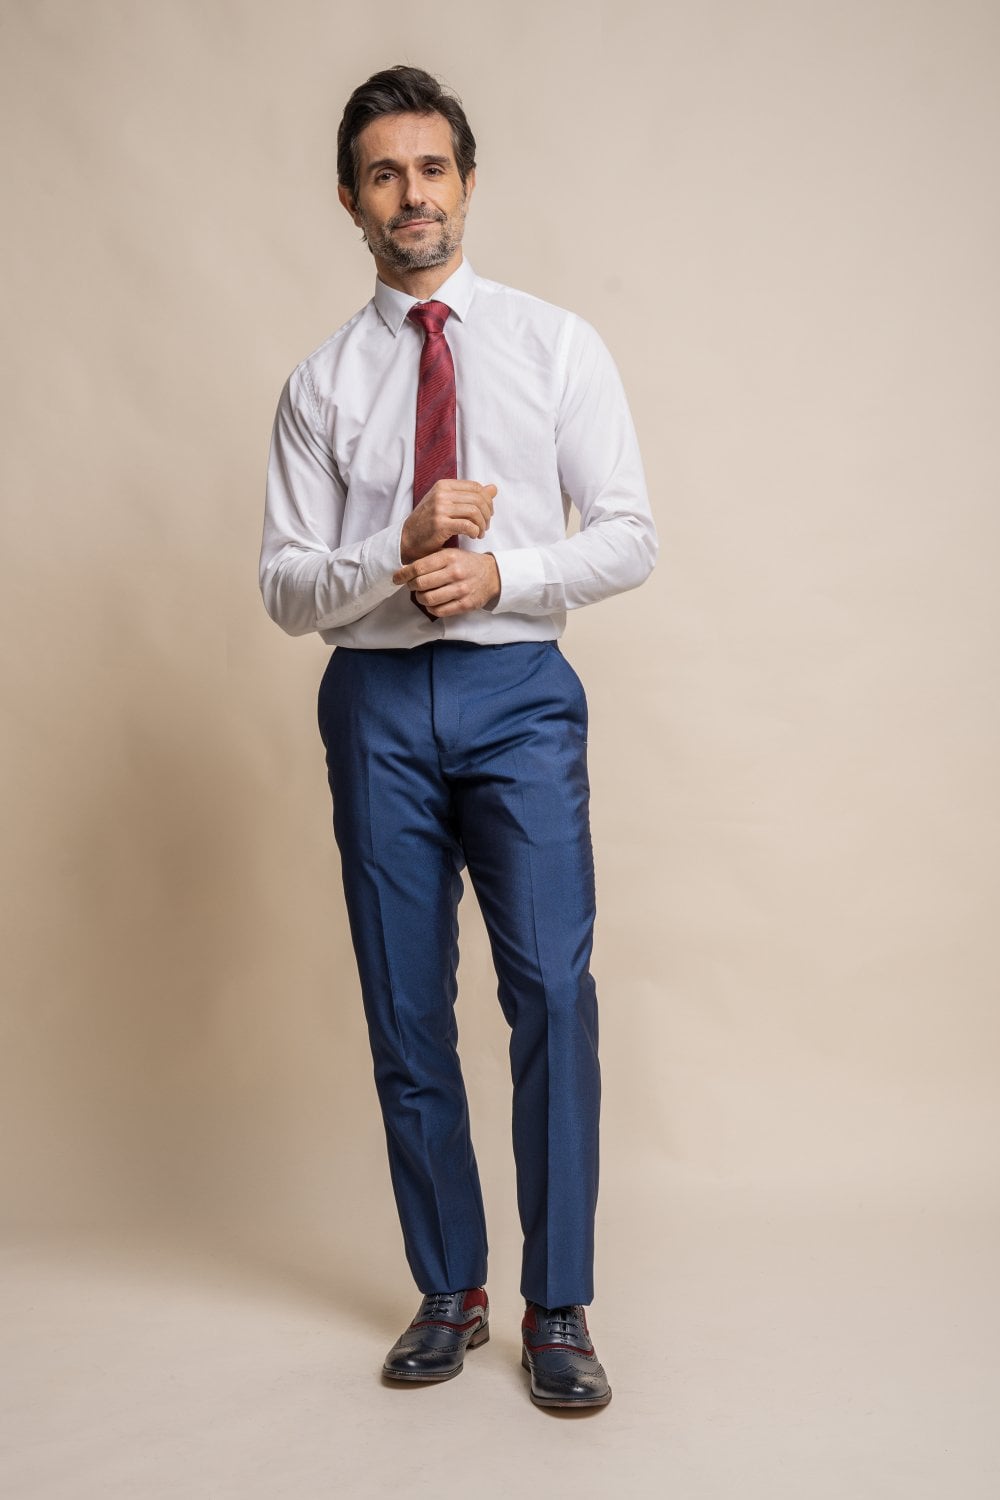 HOUSE OF CAVANI FORD BLUE LONG THREE PIECE SUIT